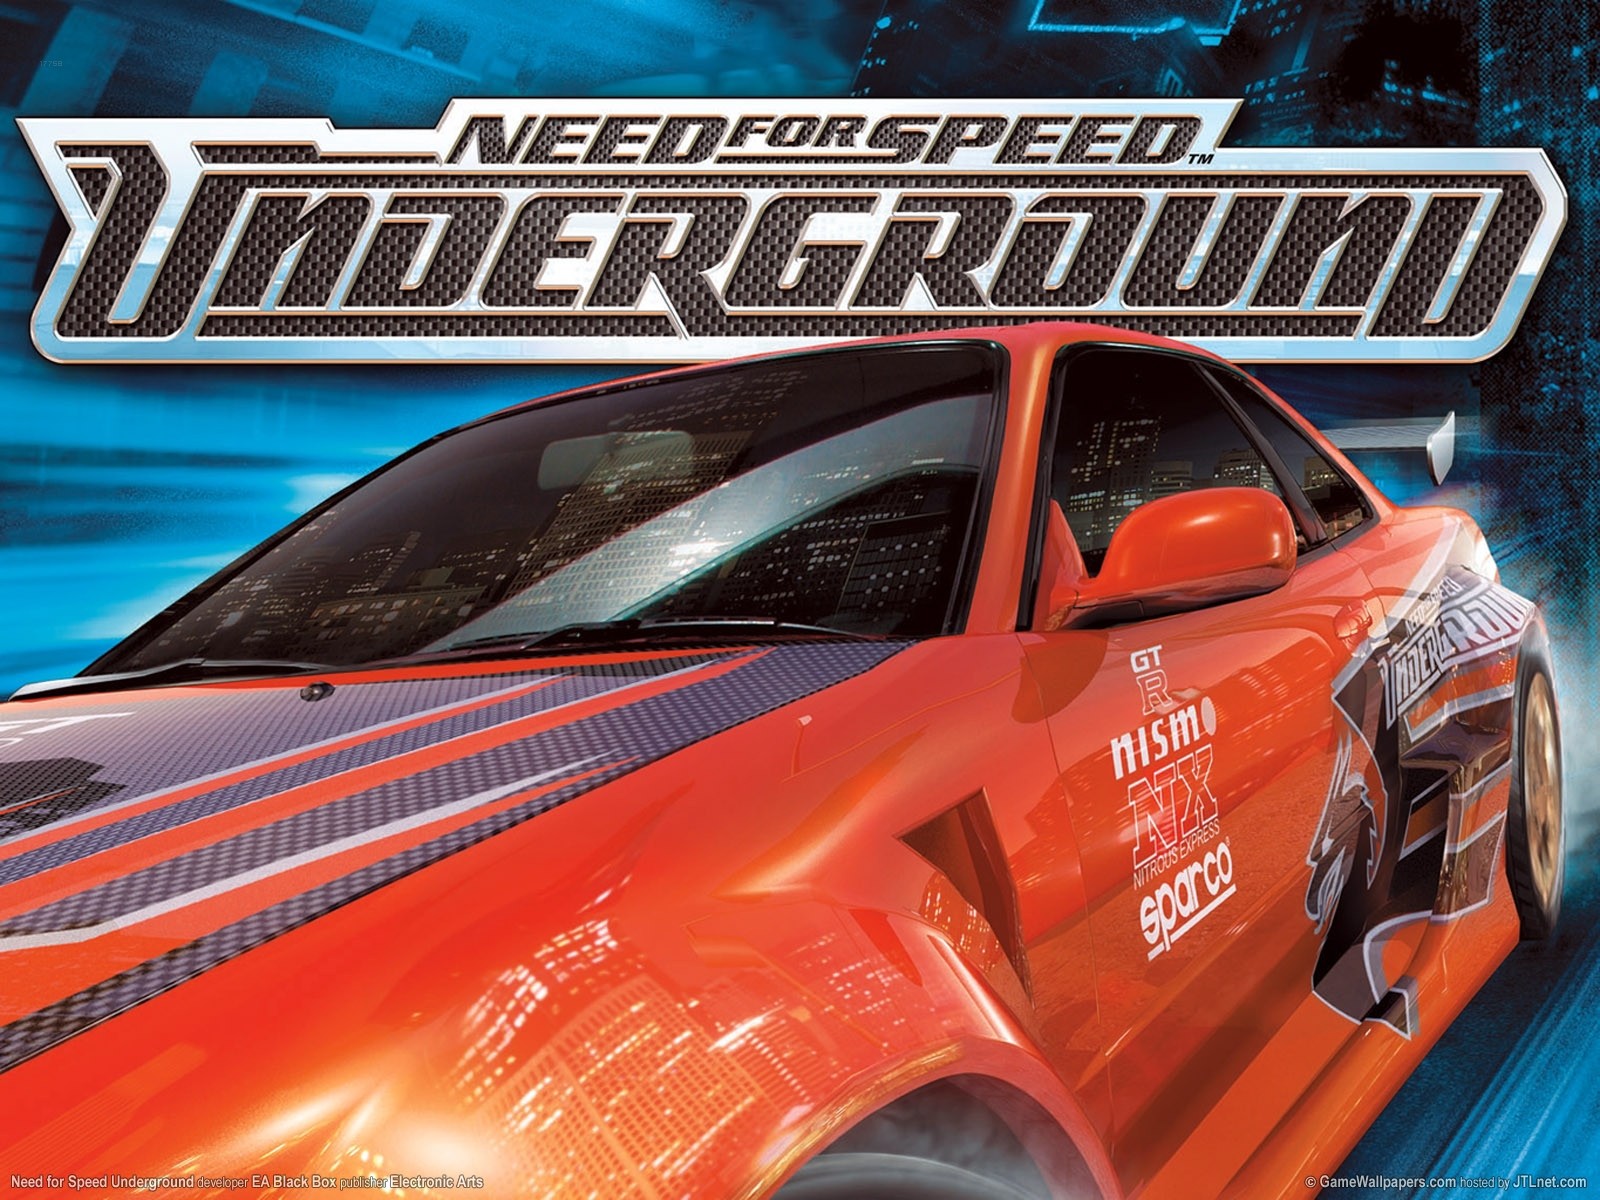 need for speed underground 2 wallpaper,vehicle,car,racing video game,pc game,performance car